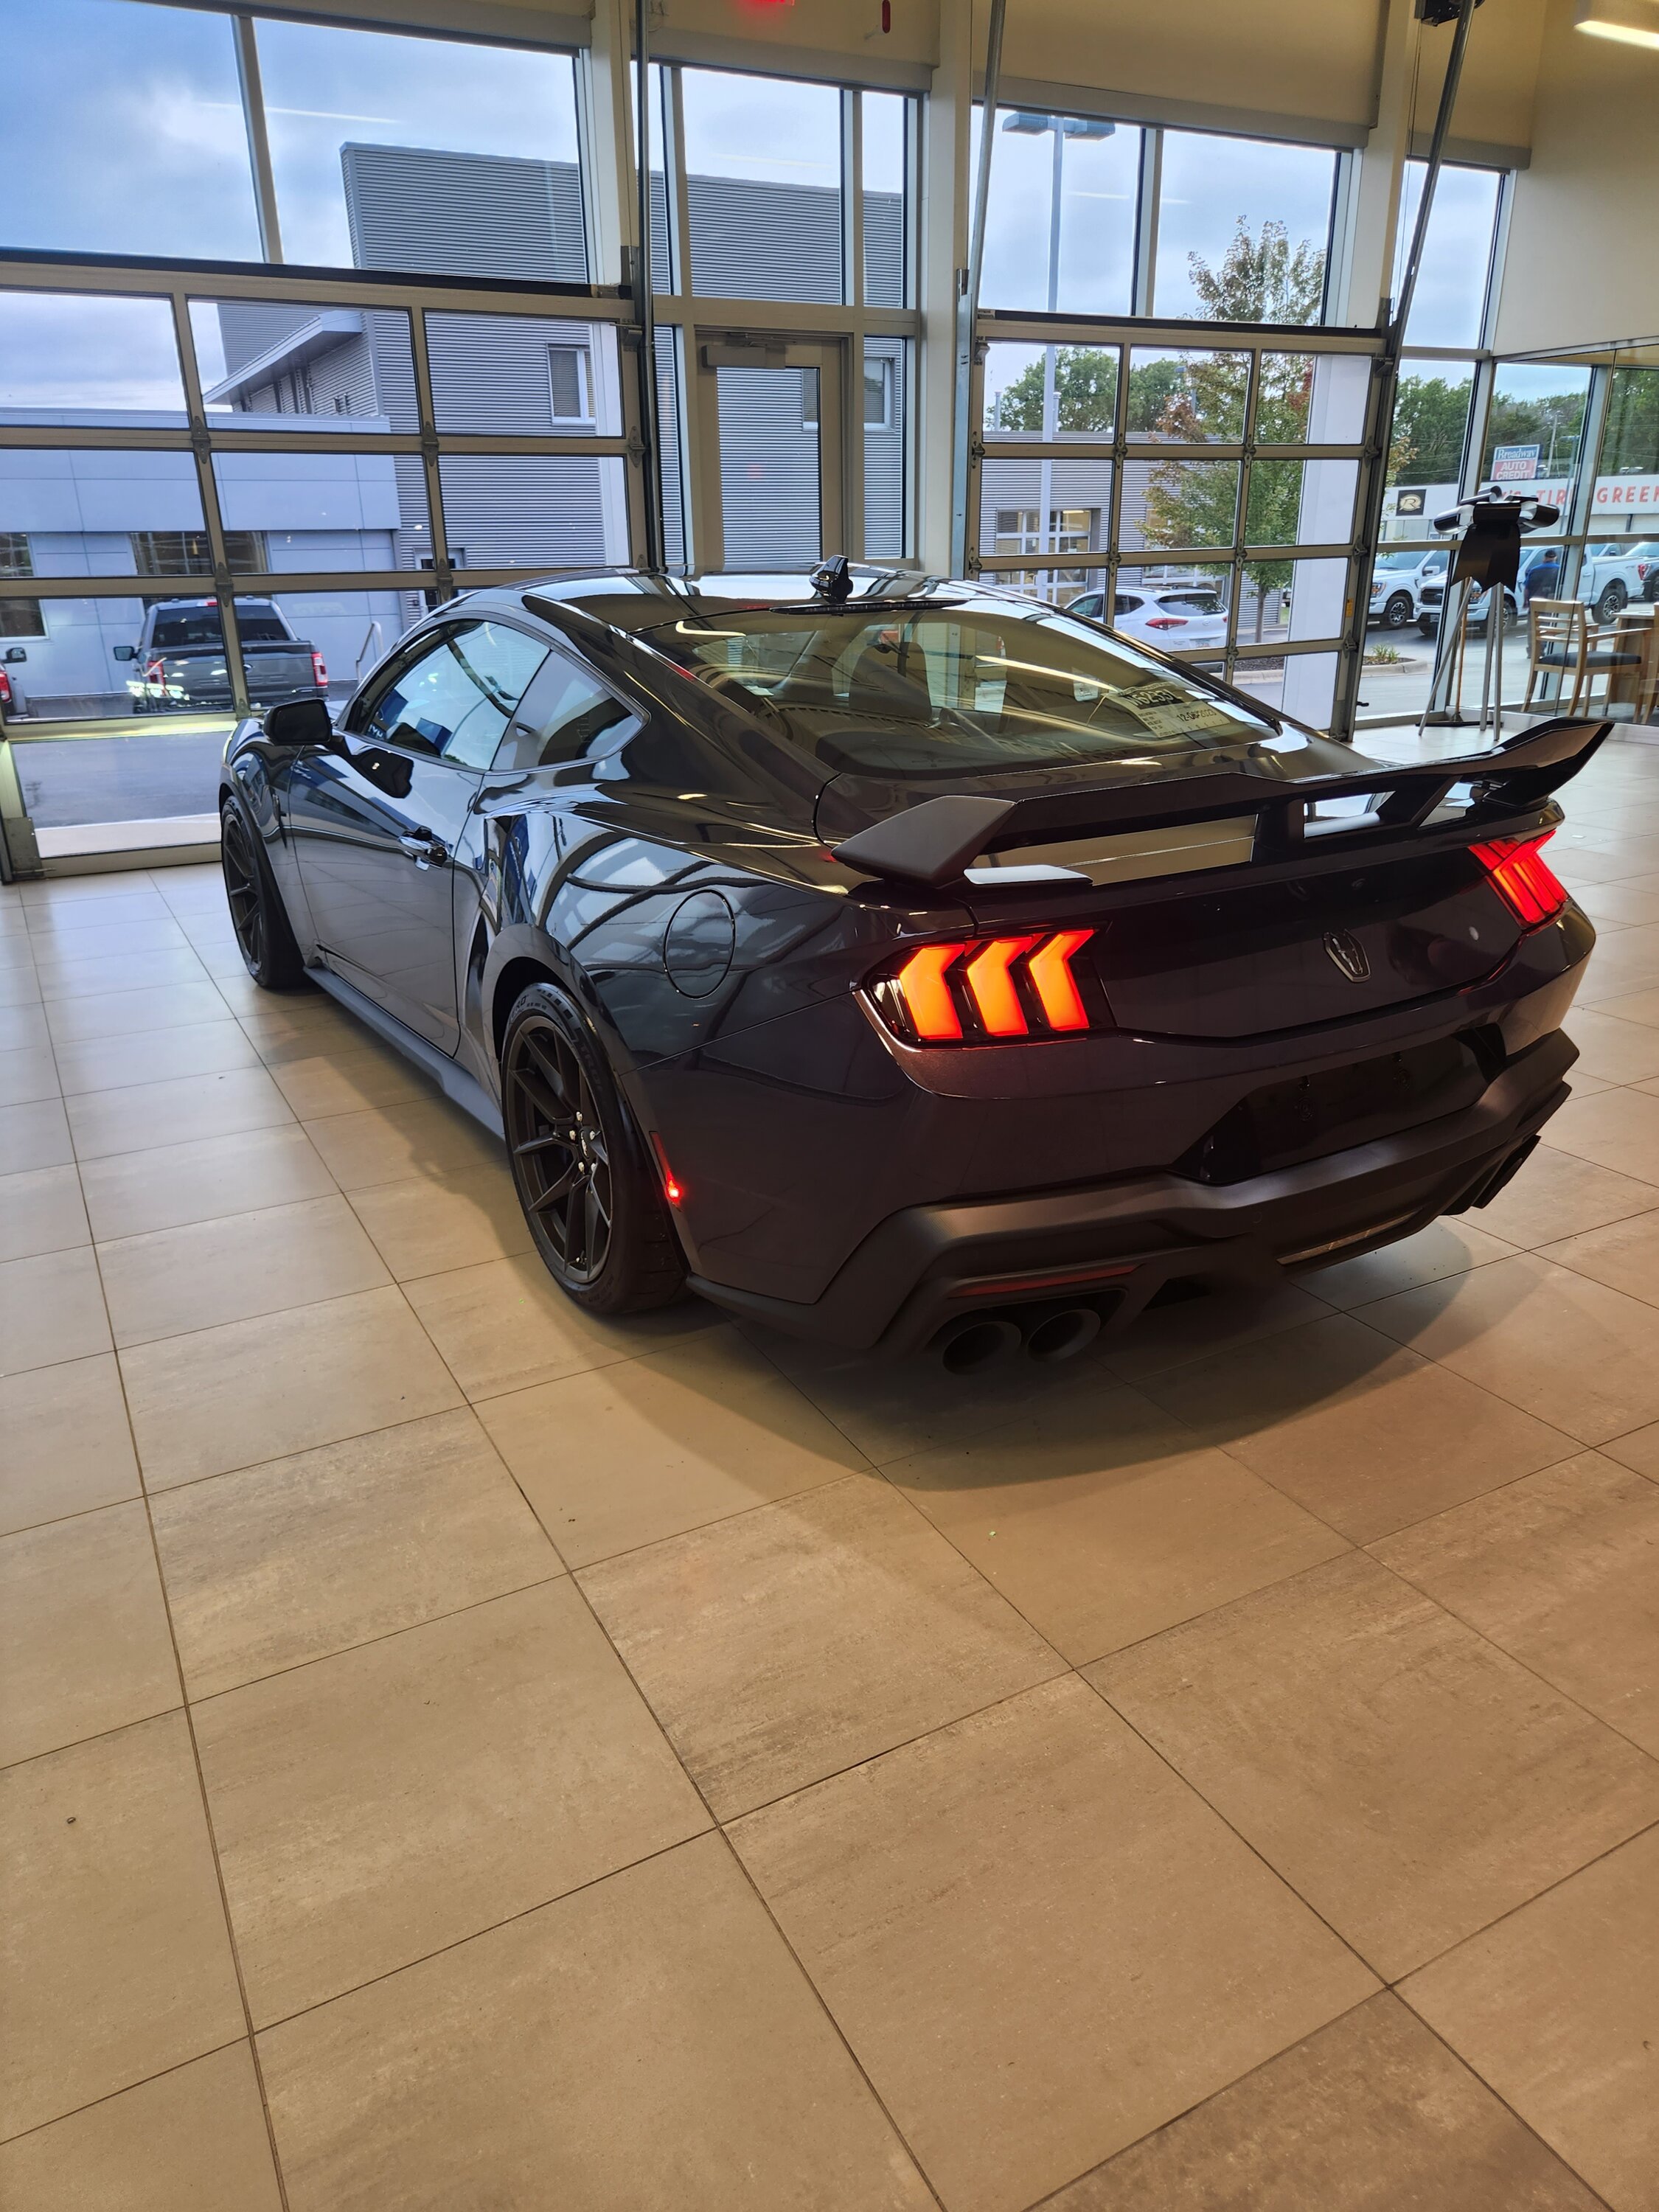 S650 Mustang Delivery Pics & Video: Pyroguy's Blue Ember Dark Horse, HP 20230907_175602